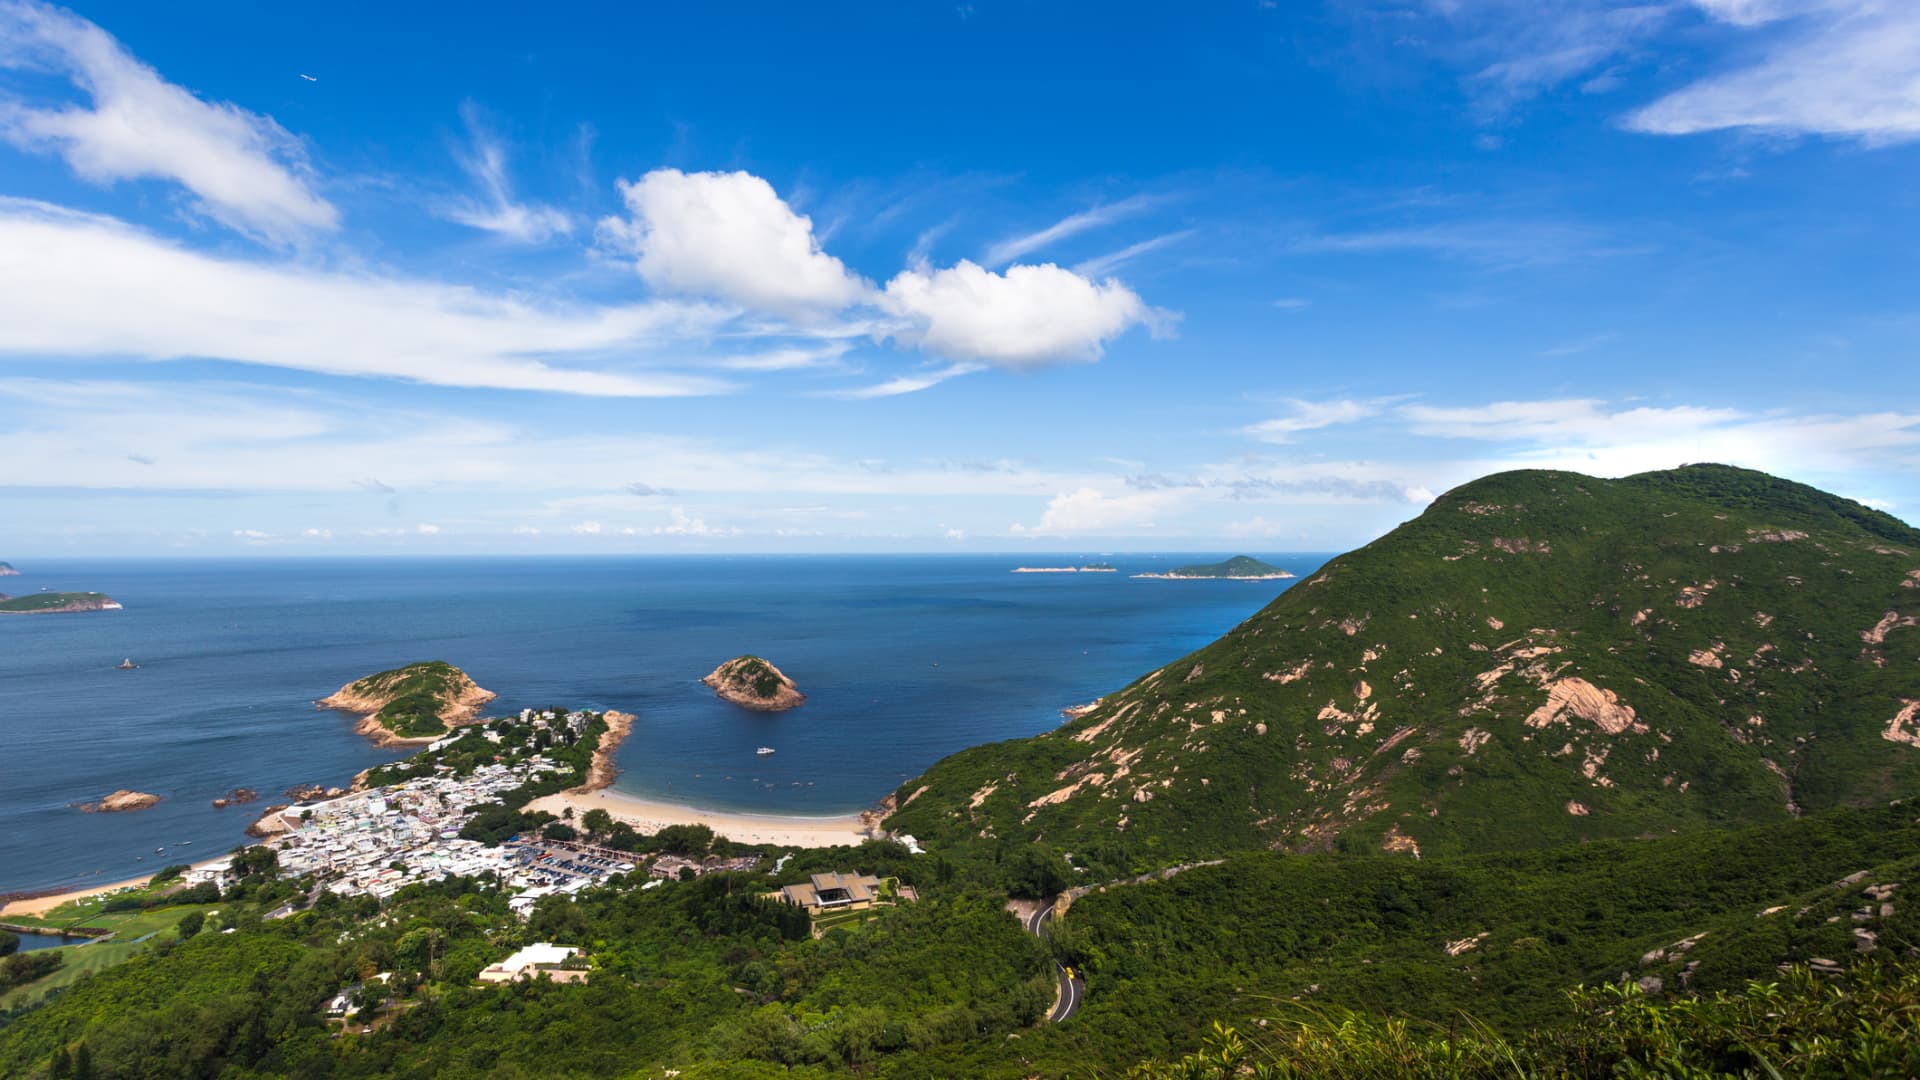 The view along Dragon's Back, a popular hiking trail in Sheck O Country Park on Hong Kong Island.